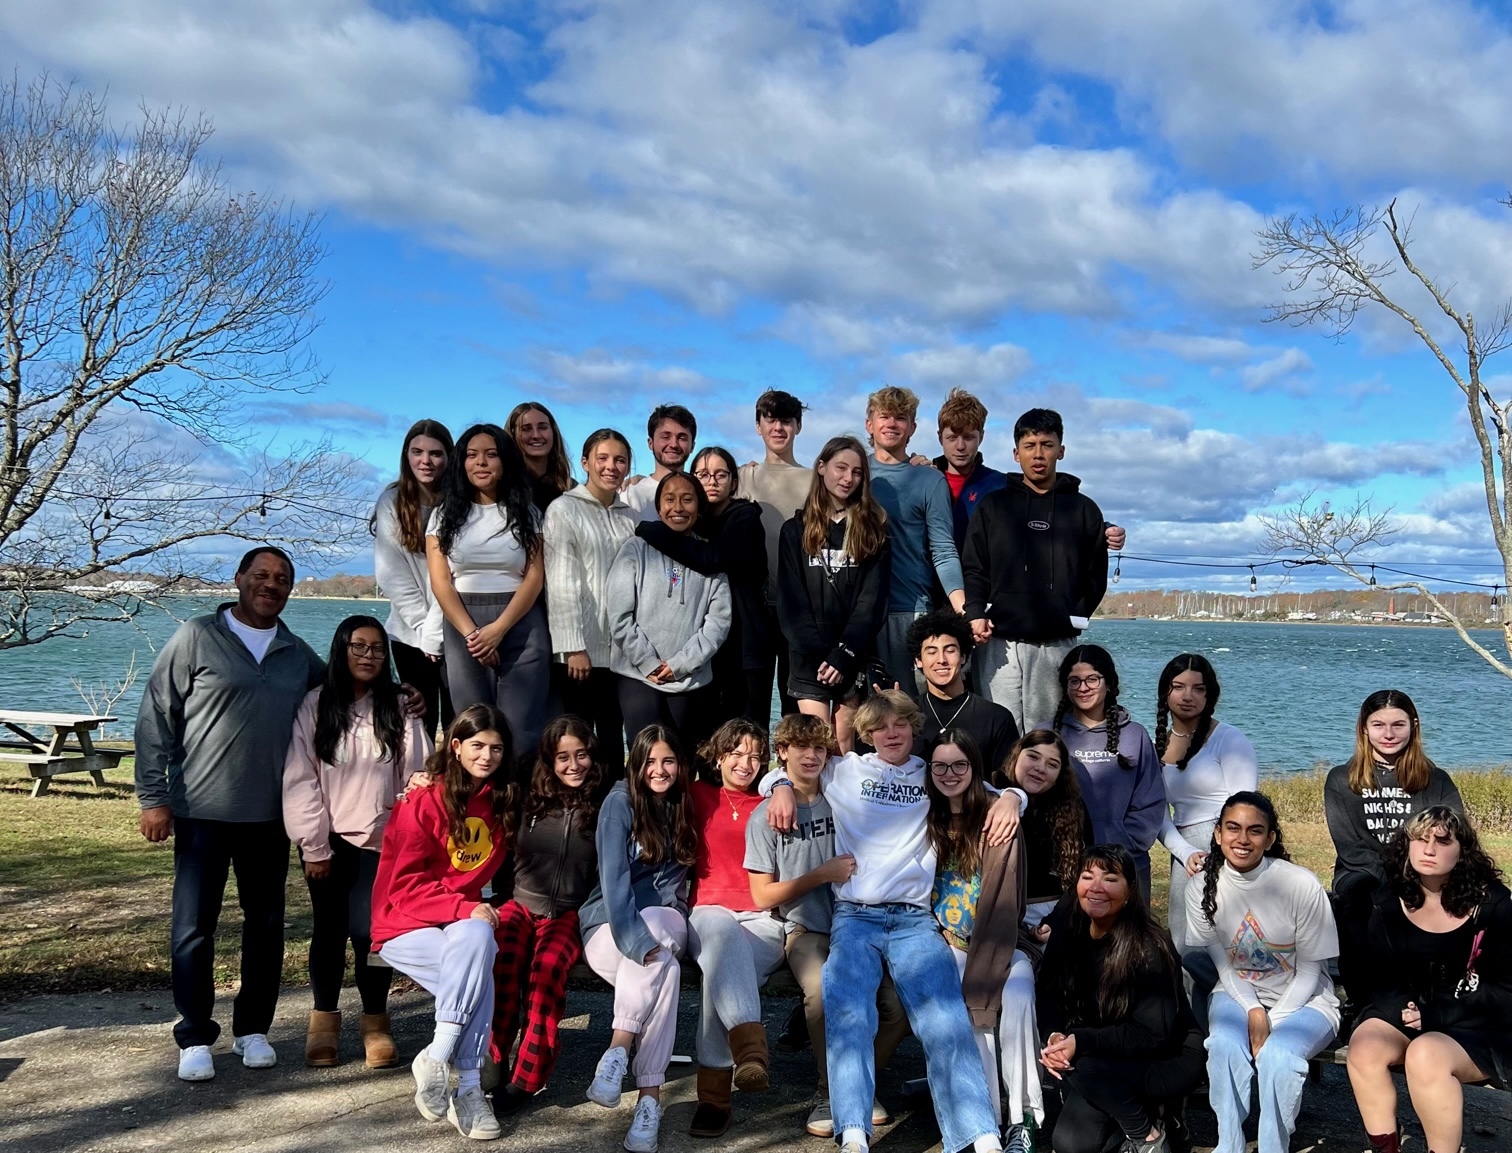 Members of Southampton High School’s Natural Helpers club recently participated in a retreat on Shelter Island. During the weekend retreat, they bonded and participated in training sessions on peer-to-peer support and bringing strength, resilience and kindness to their school. COURTESY SOUTHAMPTON SCHOOL DISTRICT